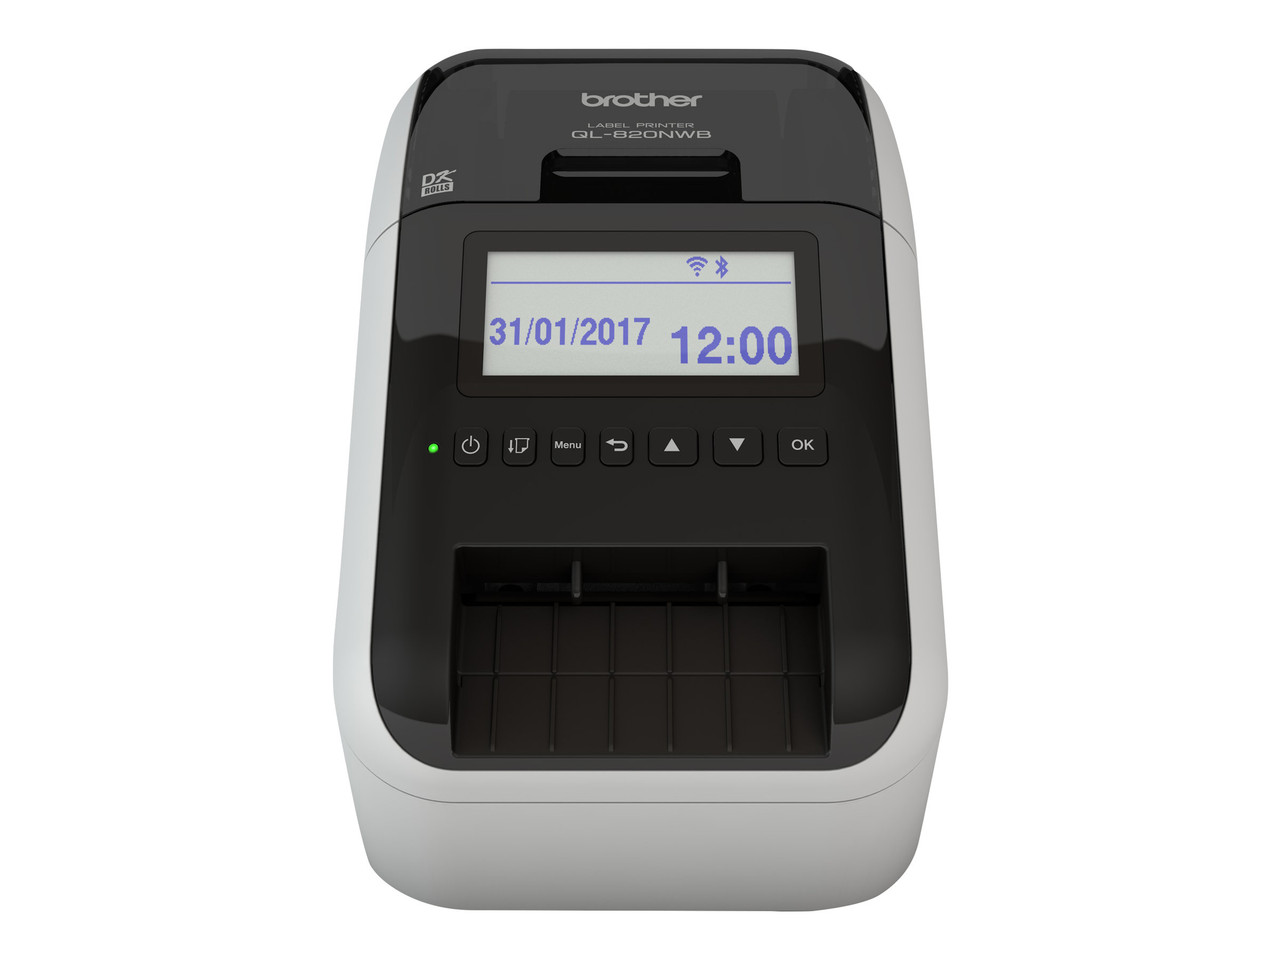 Brother QL-820NWB Label Printer Two-color (monochrome)